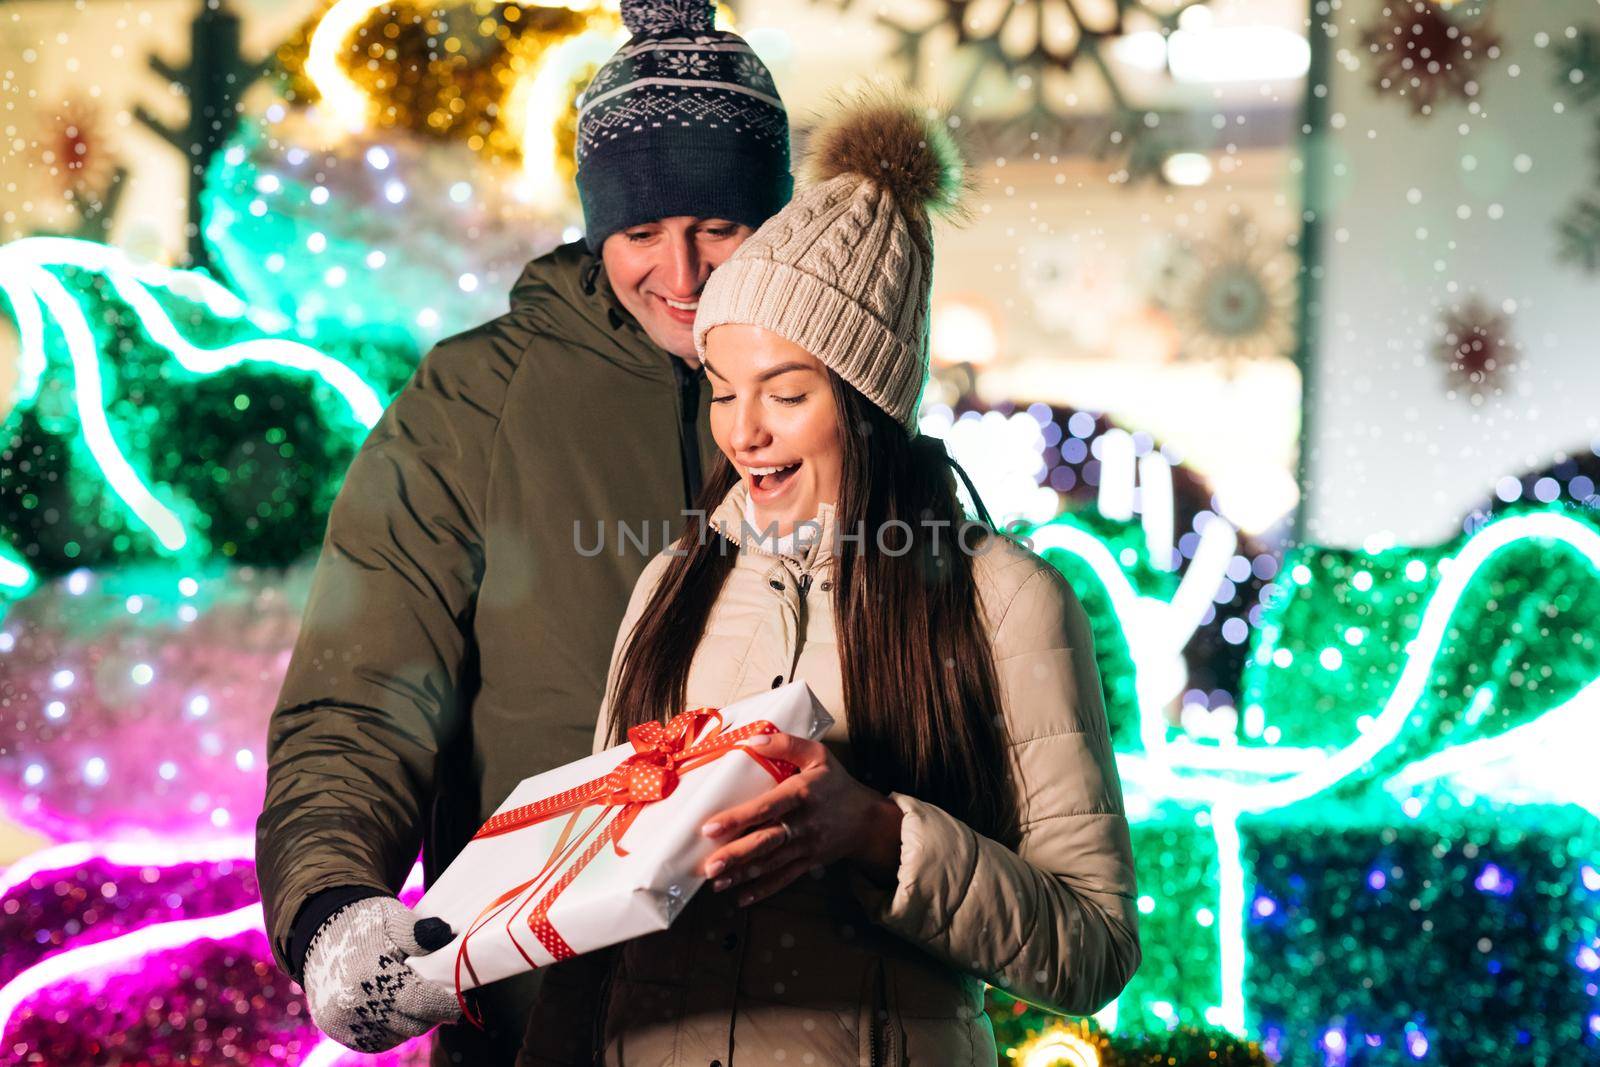 Young happy couple in love taking funny selfies on a smart phone in the Christmas atmosphere. Christmas decorated. Exchange of gifts. Christmas present to beautiful woman.